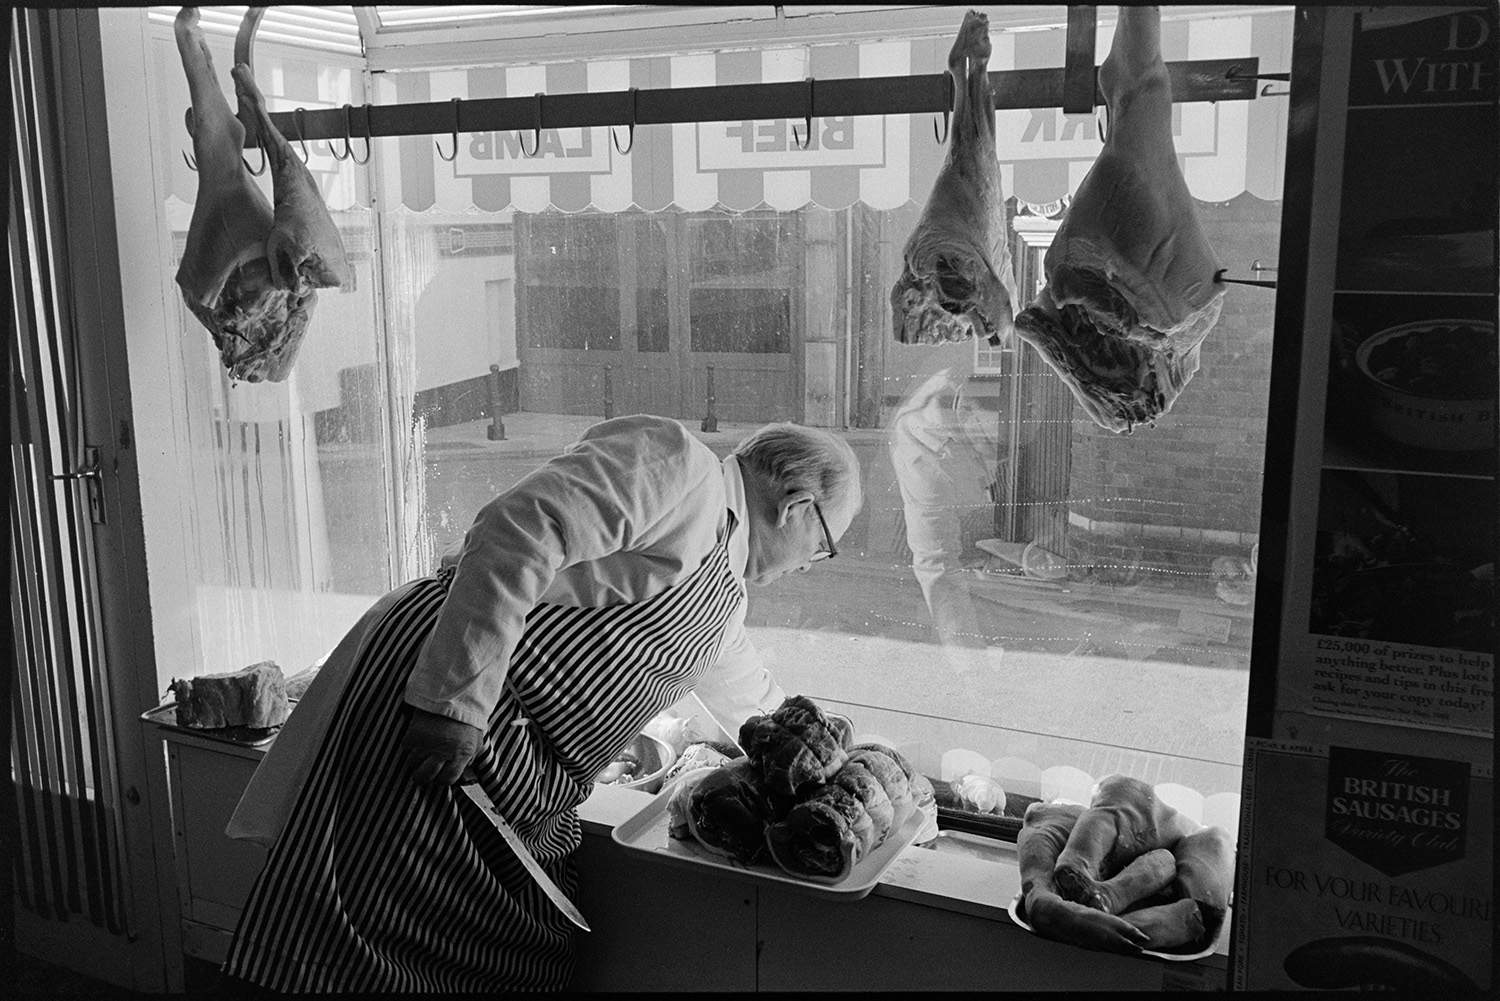 Window of butchers shop with passers by, seen from inside, butcher selecting meat. 
[A butcher selecting cuts of meat from the window display in W Cann butchers shop in South Molton Street, Chulmleigh.]